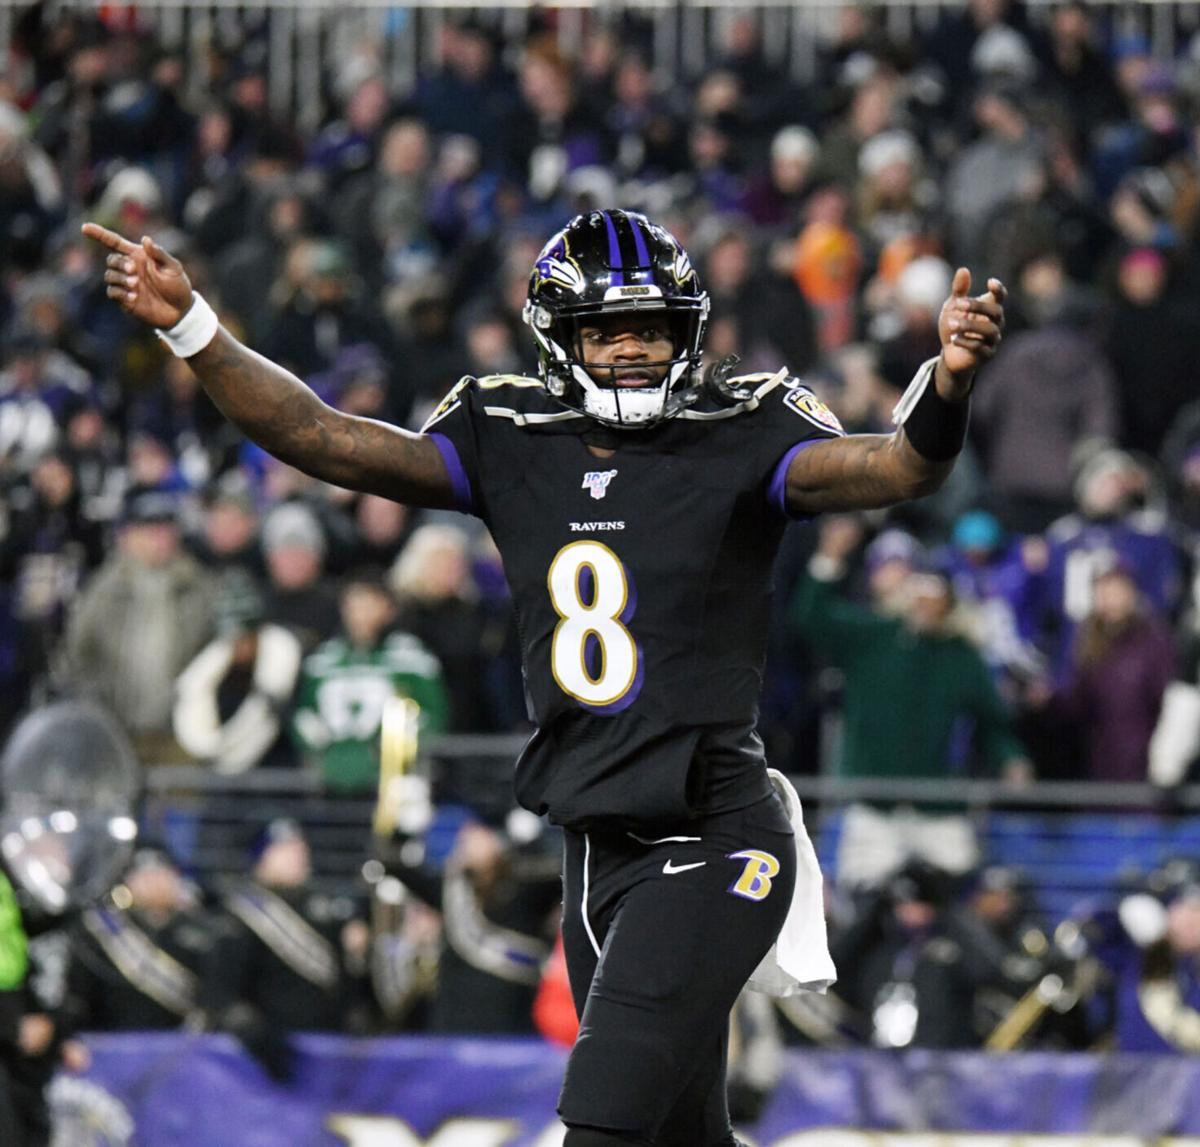 NFL QB Lamar Jackson agrees to new contract with Baltimore Ravens